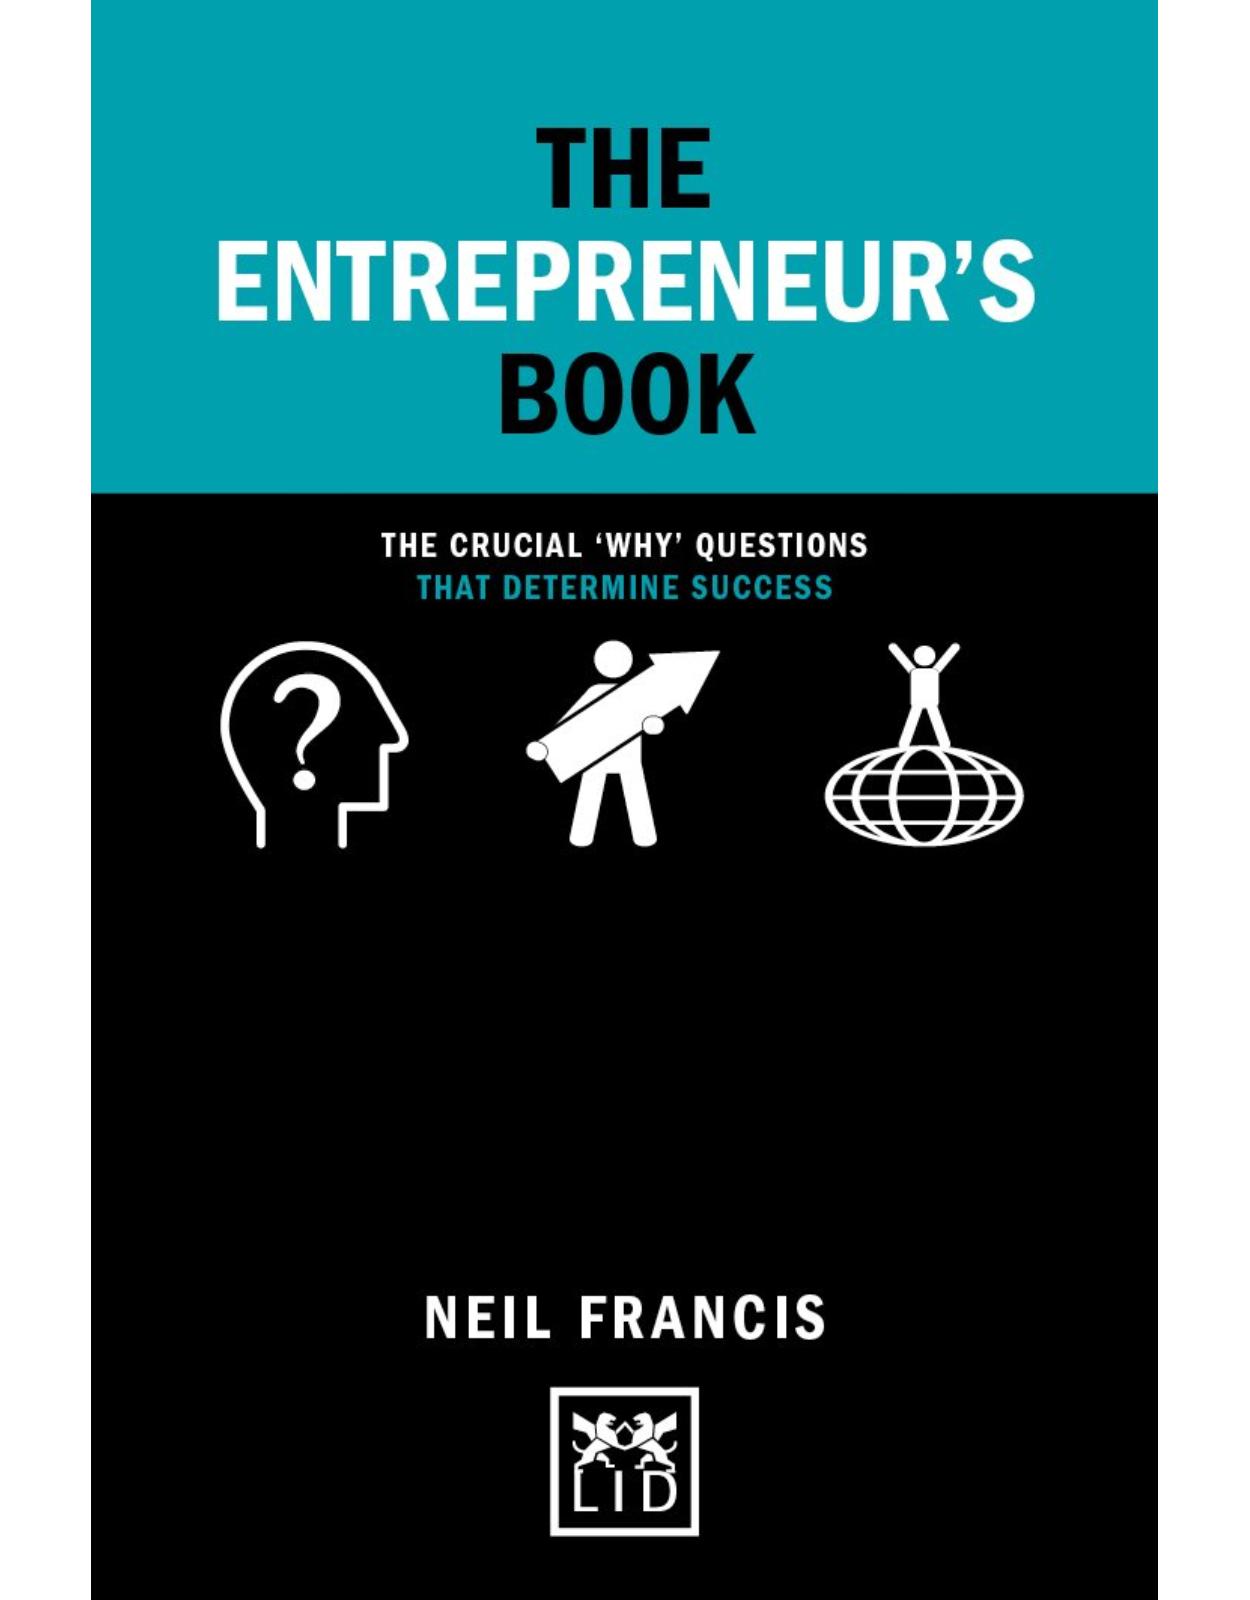 The Entrepreneur's Book: The crucial 'why' questions that determine success